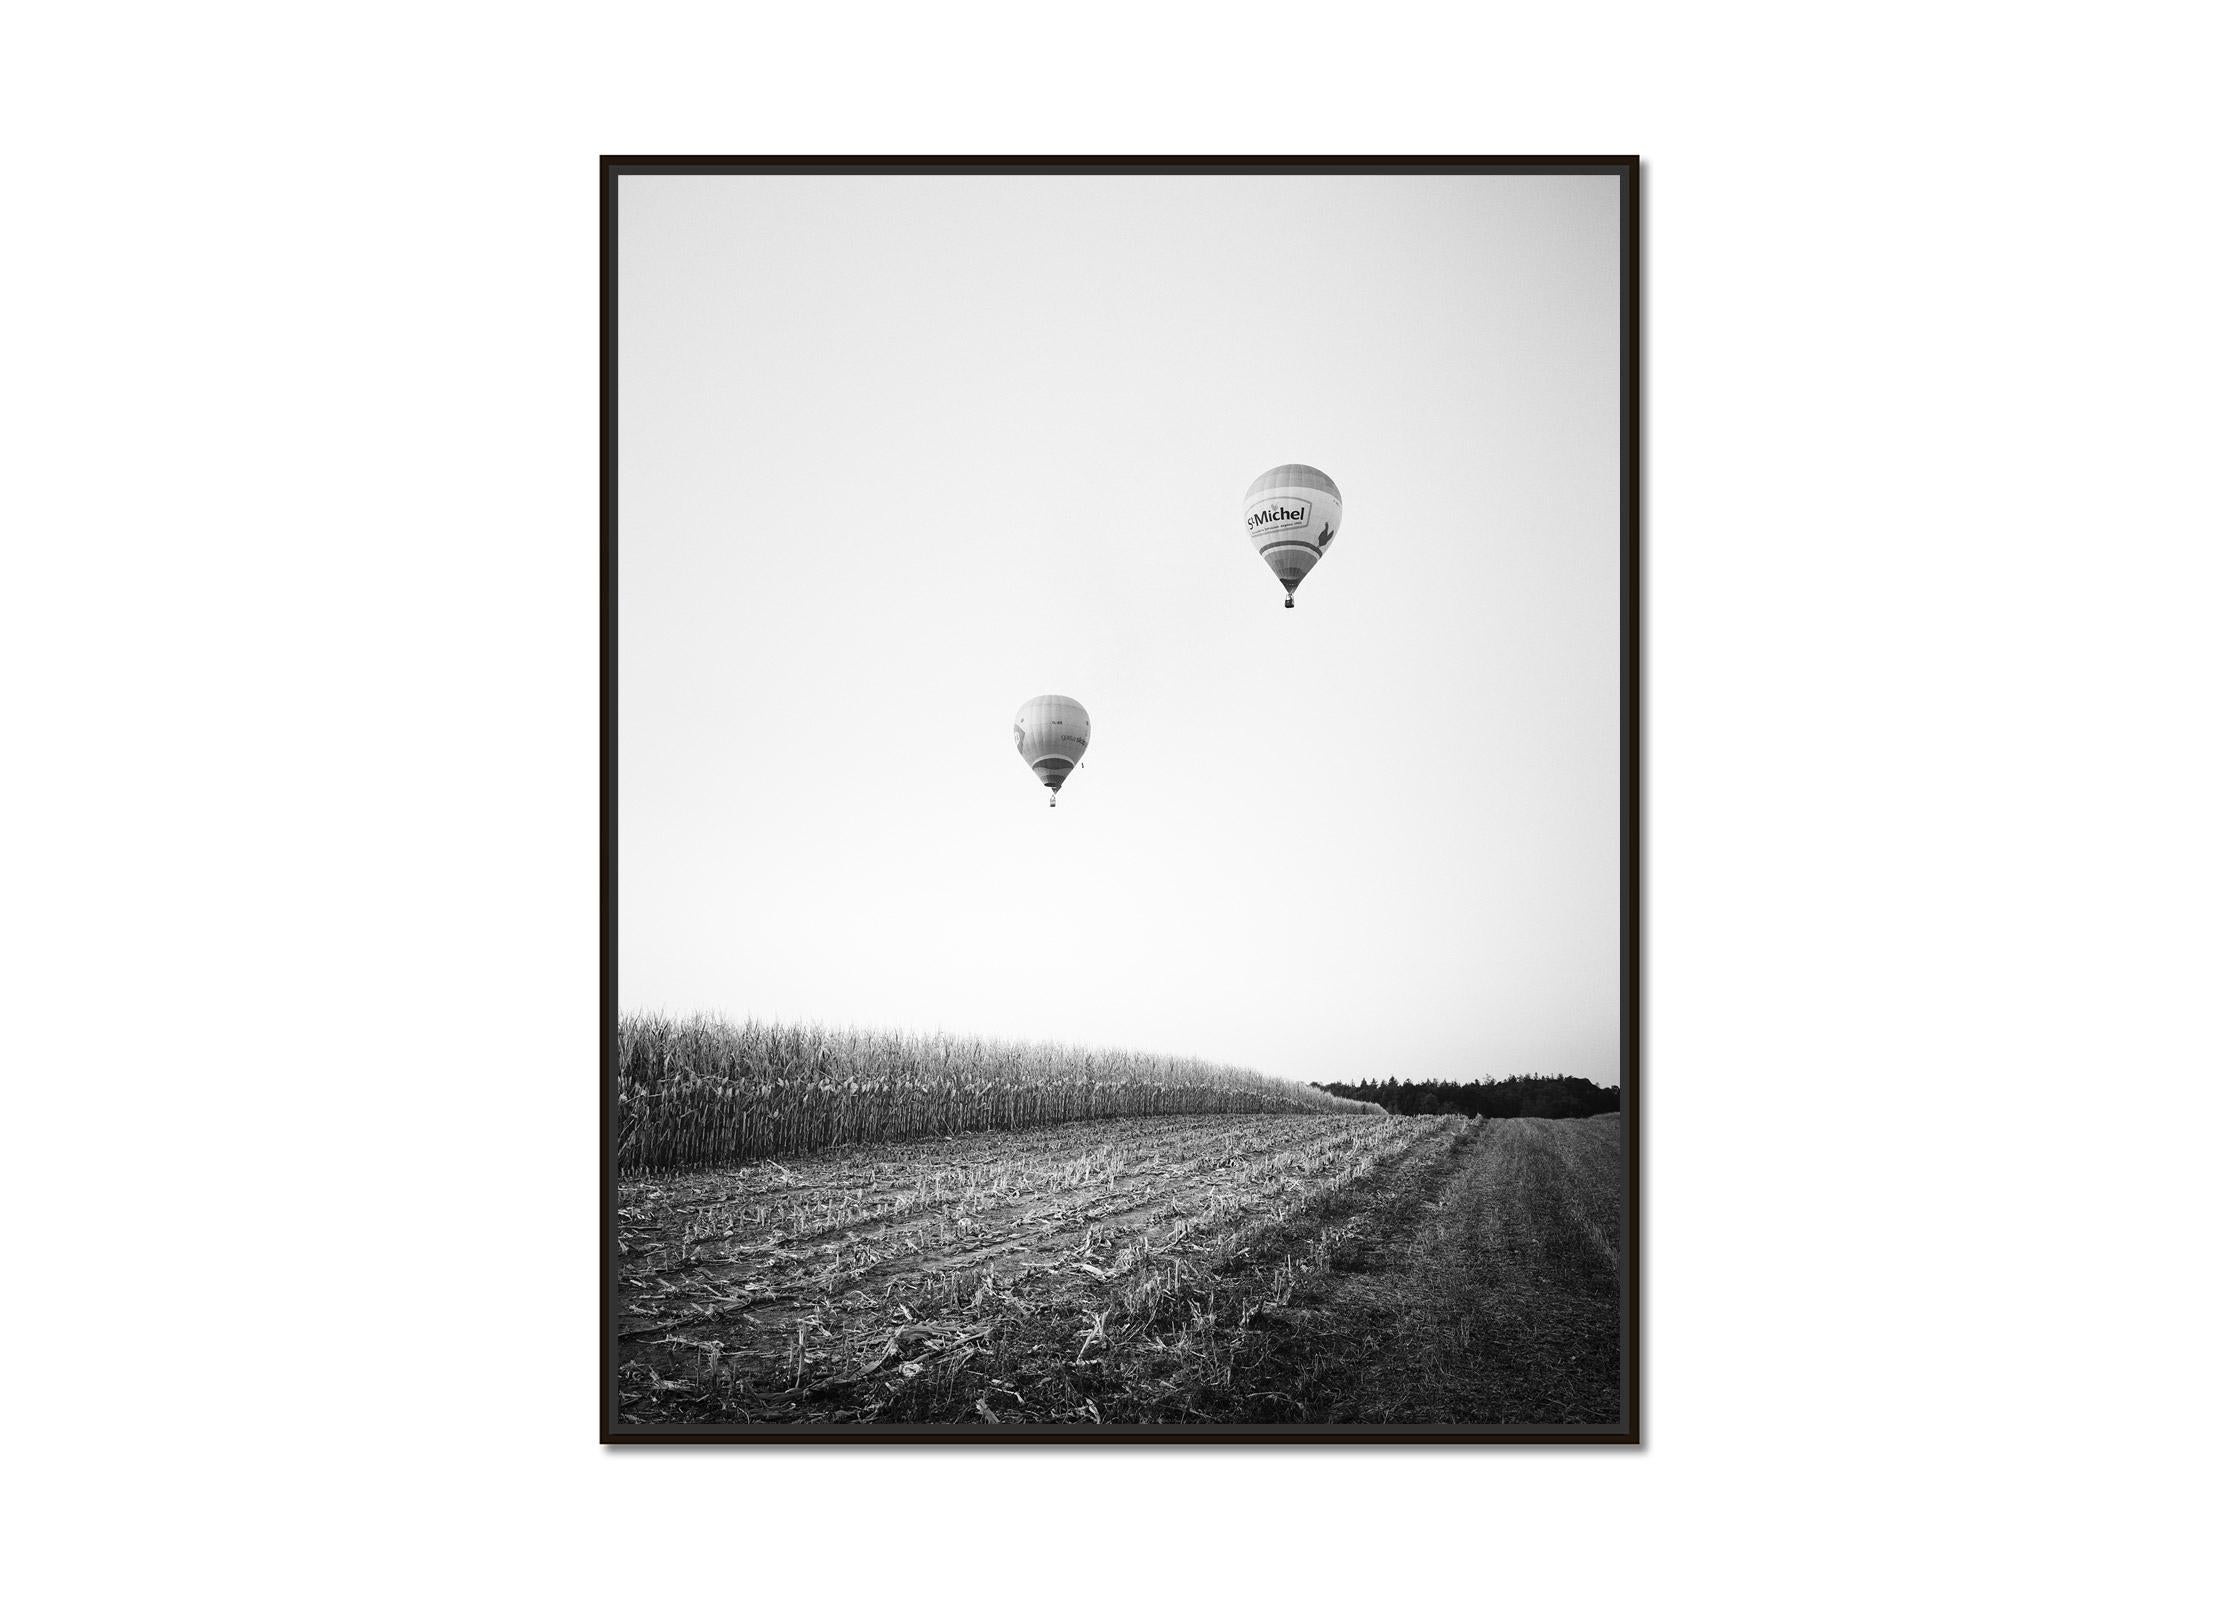 Hot Air Balloon world Championship, Austria, black and white prints, landscape - Photograph by Gerald Berghammer